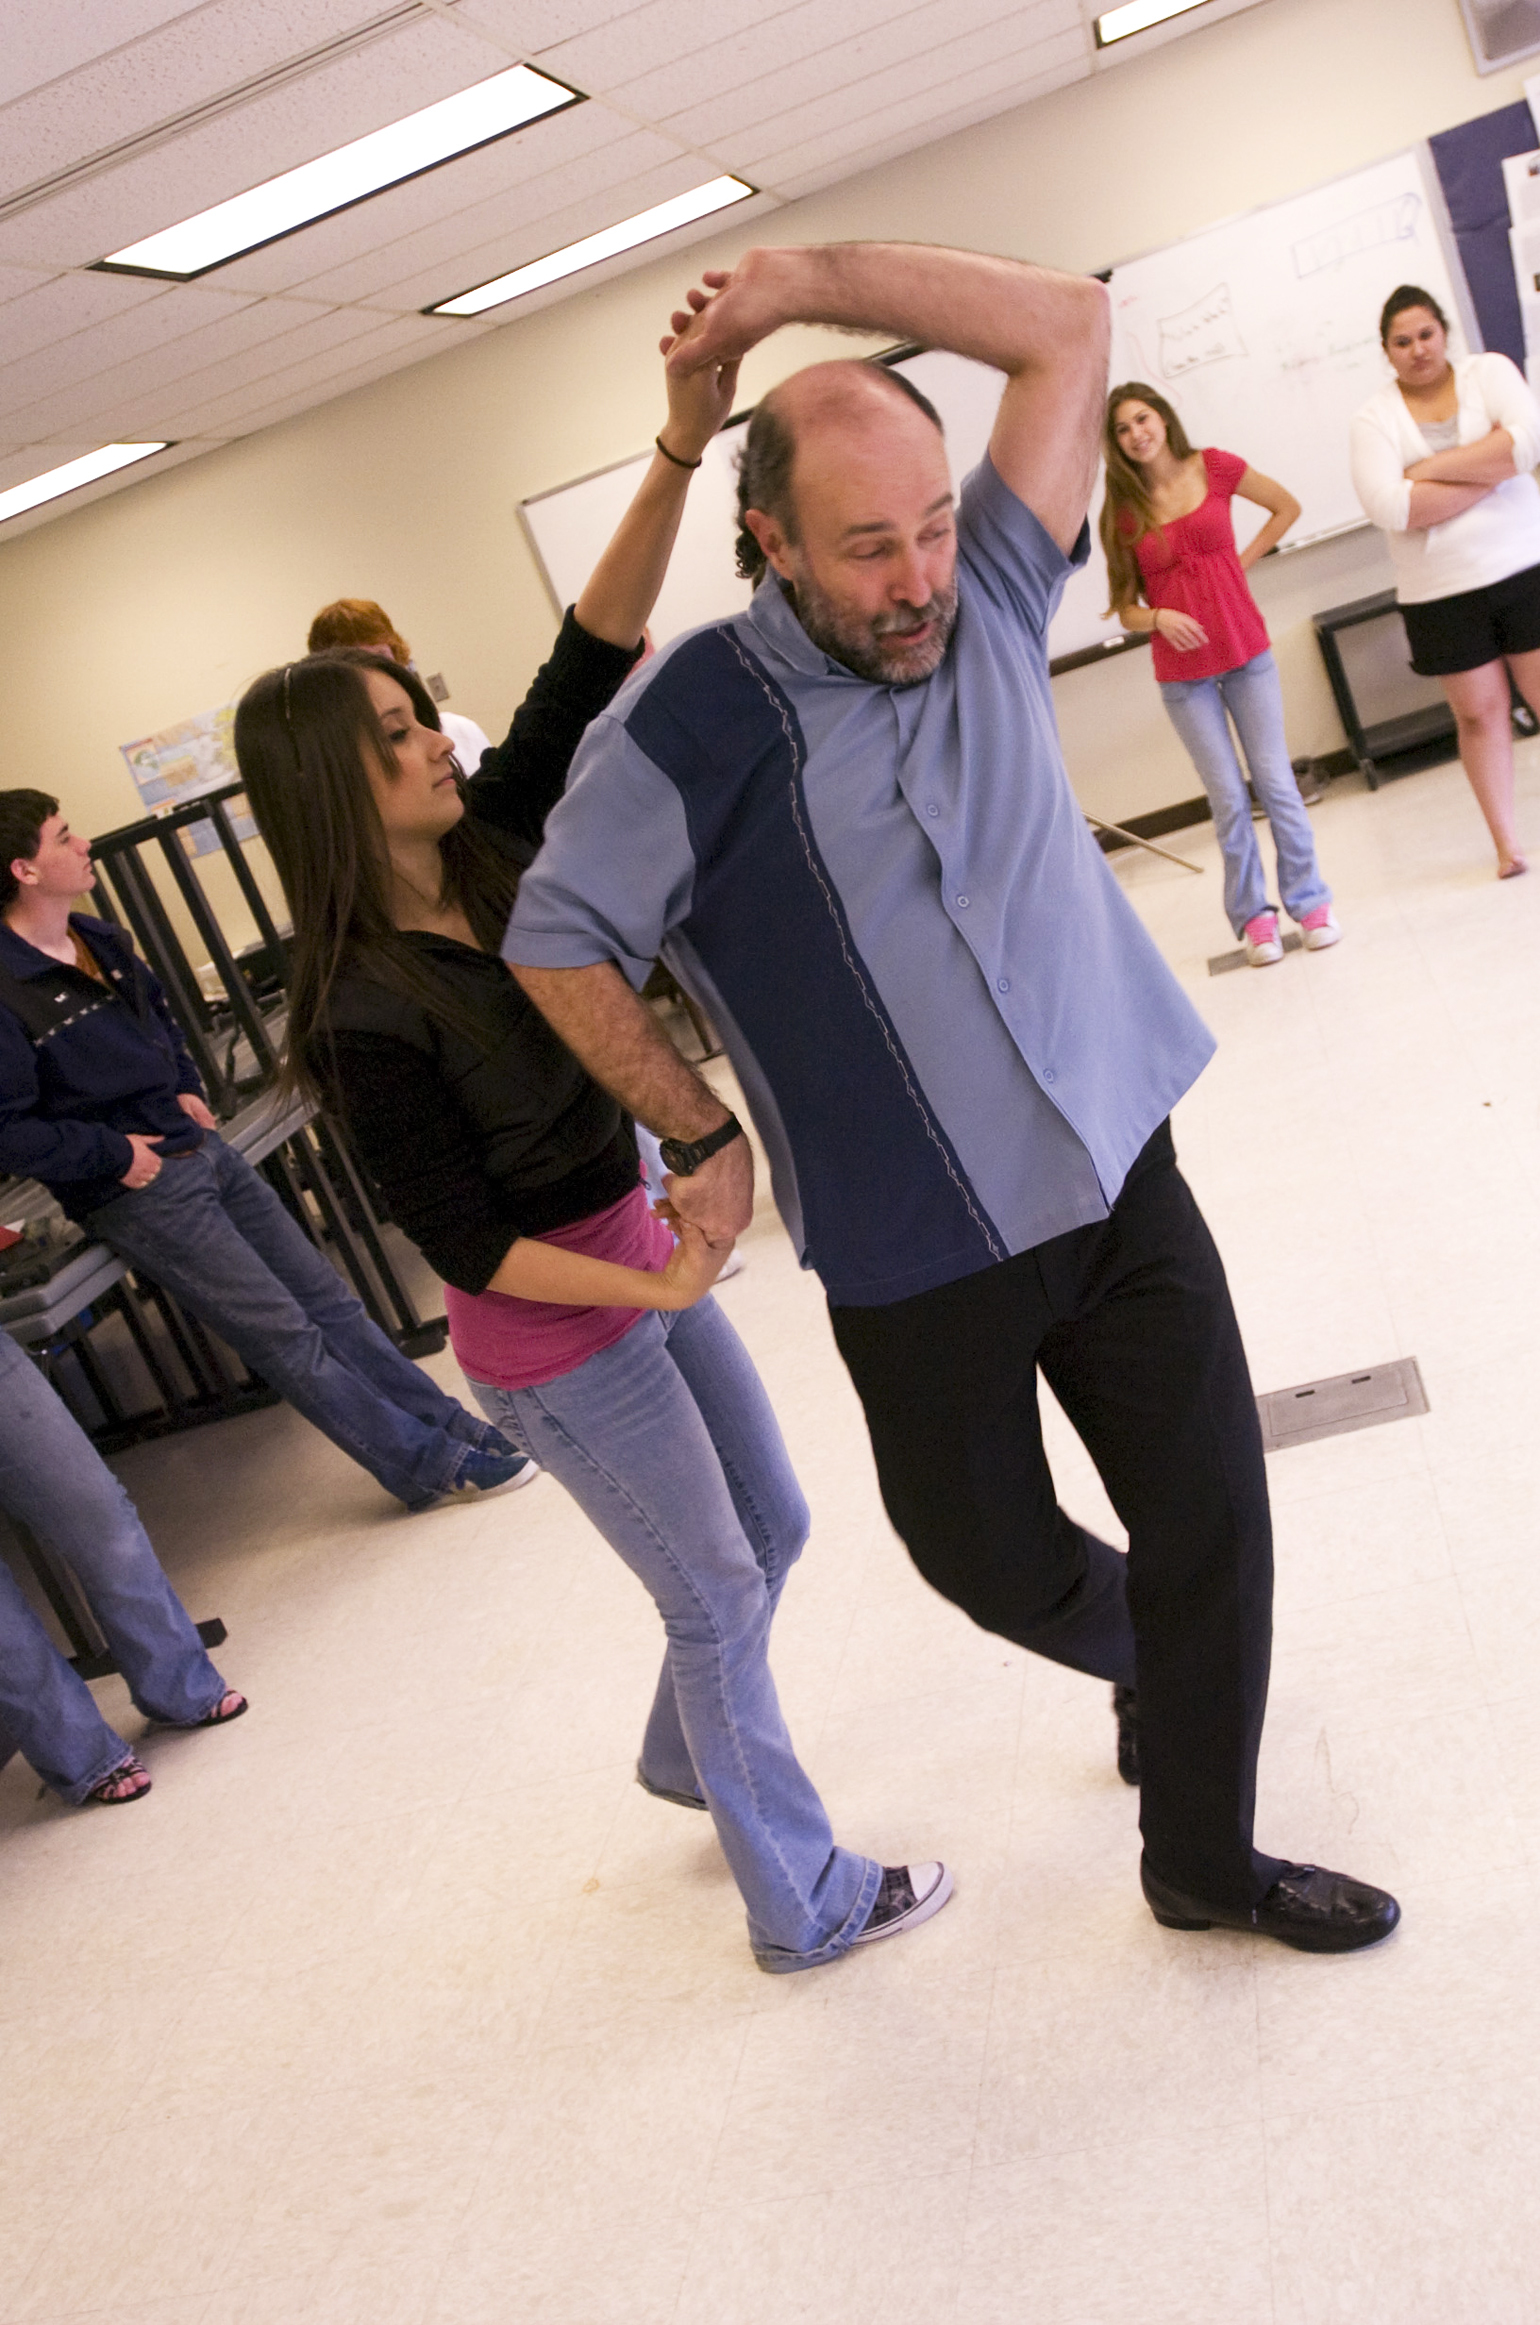 Eddie Wood, of Homer, demonstrates dance steps with Stephanie Almaraz in a Spanish class on May 5, 2008 at Soldotna High School. Wood, who travels the peninsula playing percussion and teaching salsa, is hosting his first open class for adults in Soldotna with local artist Kaitlin Vadla on Thursday. (Scott Moon/Peninsula Clarion-File)